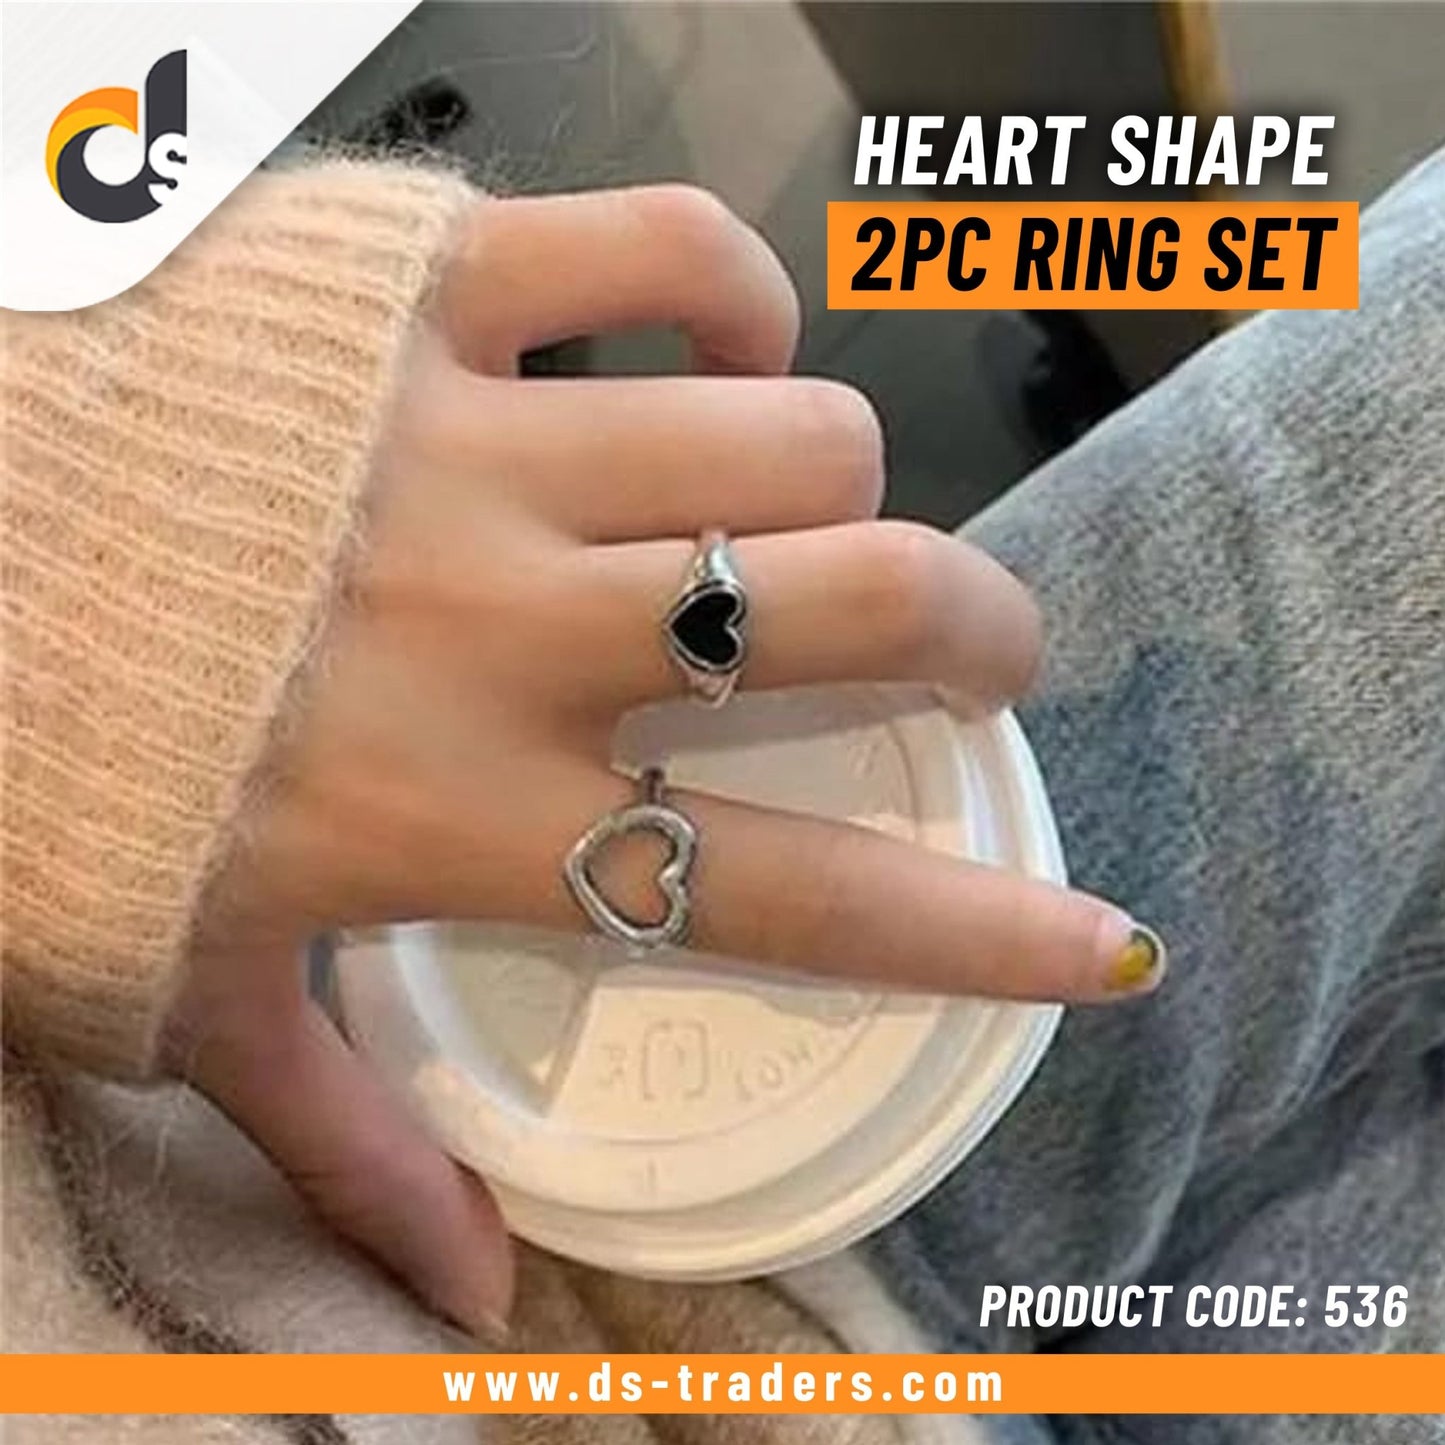 Heart Shape 2pc Ring Set - DS Traders